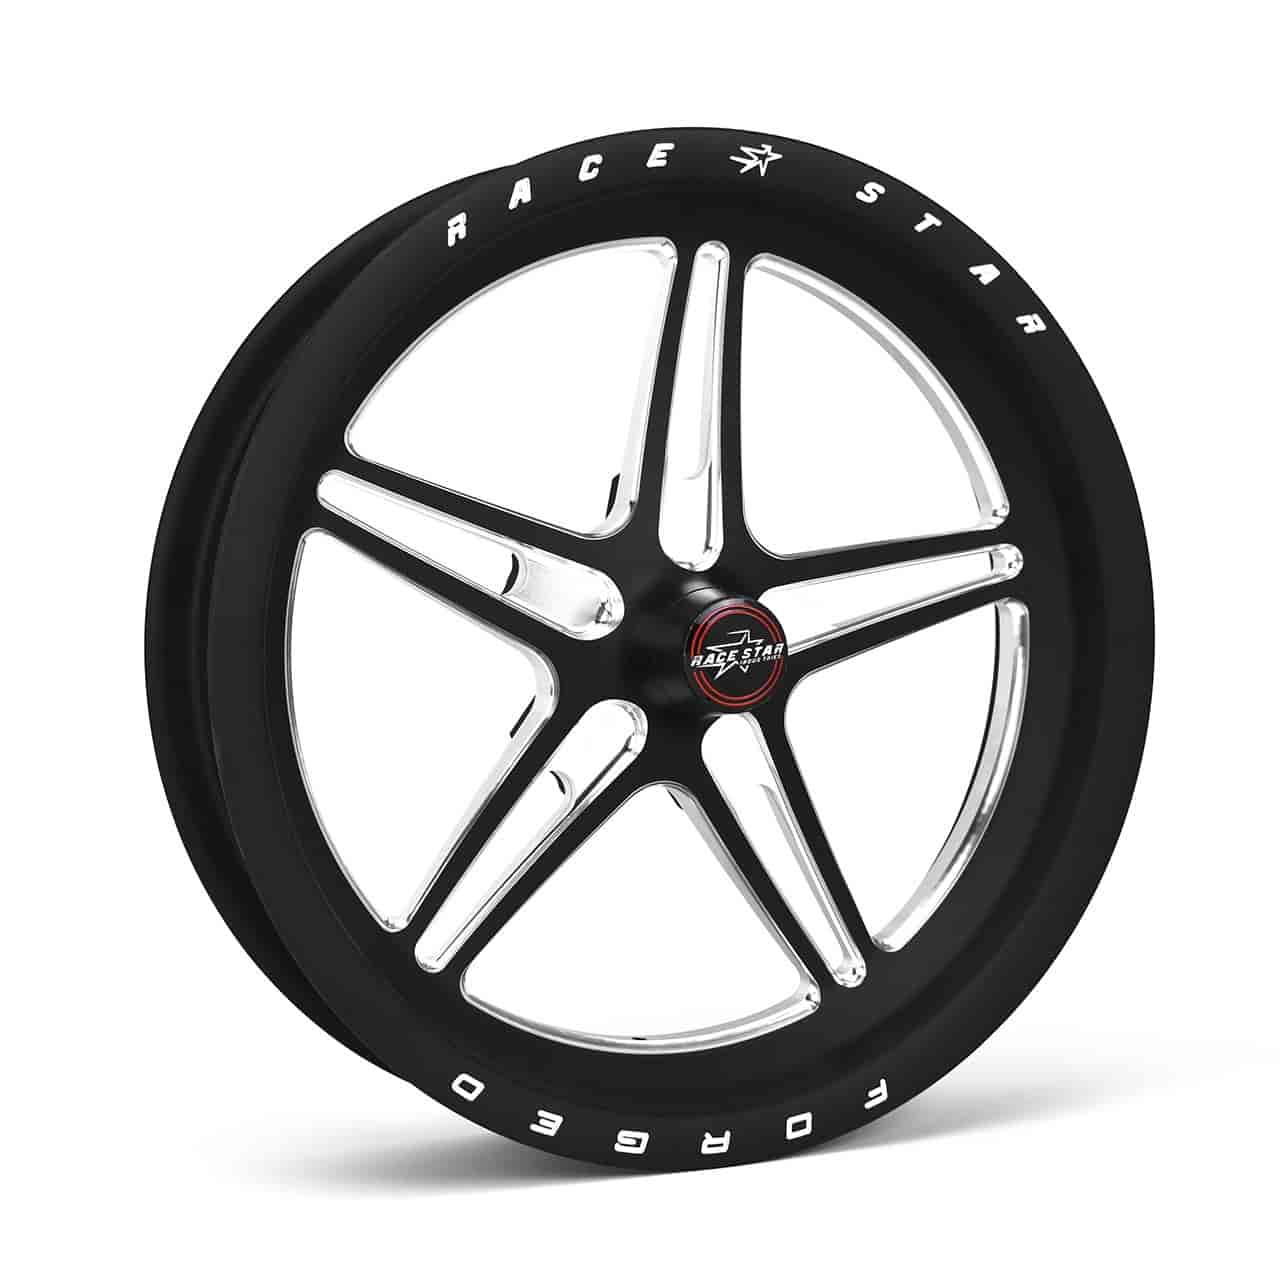 63-Series Pro Forged Wheel Size: 17" x 2.4"